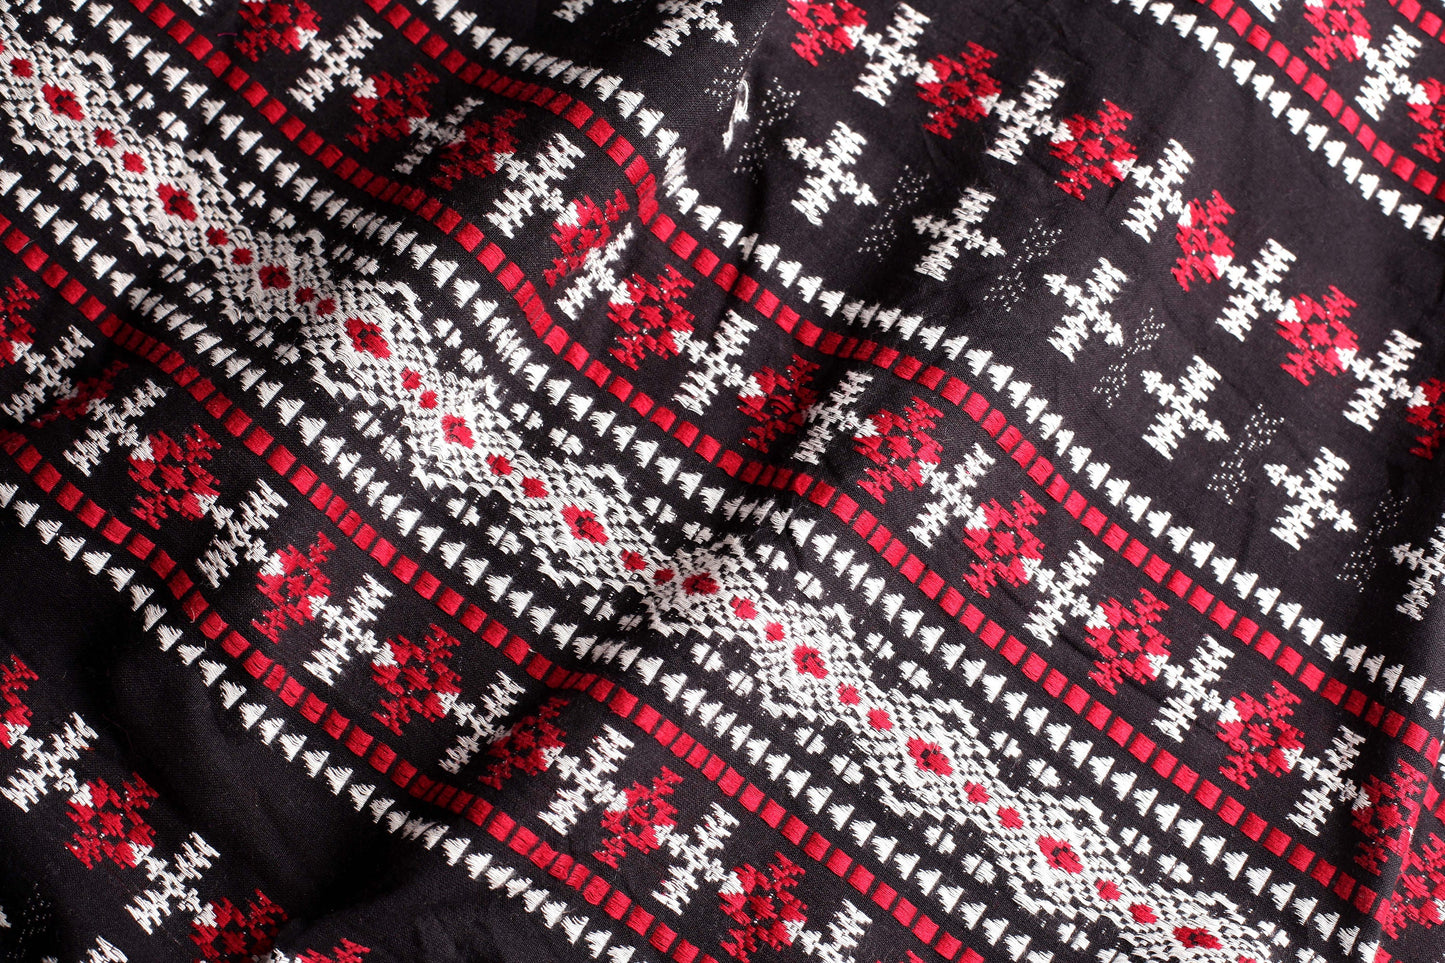 Red, Black and White Woven Fabric with Aztec Patterns